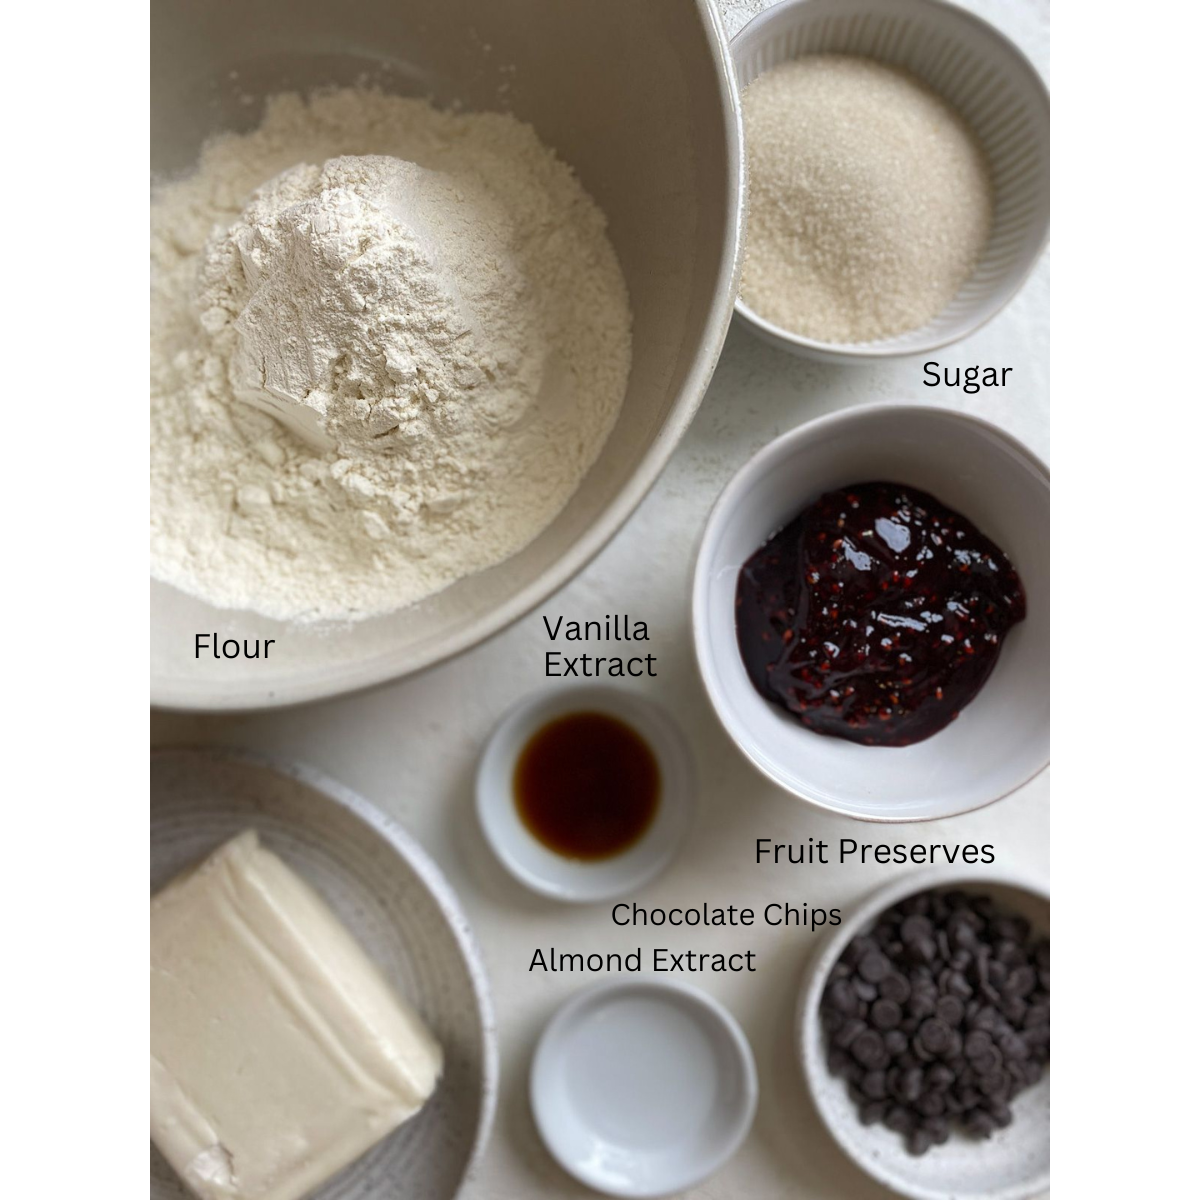 ingredients for Raspberry Thumbprint Cookies measured out against a white surface